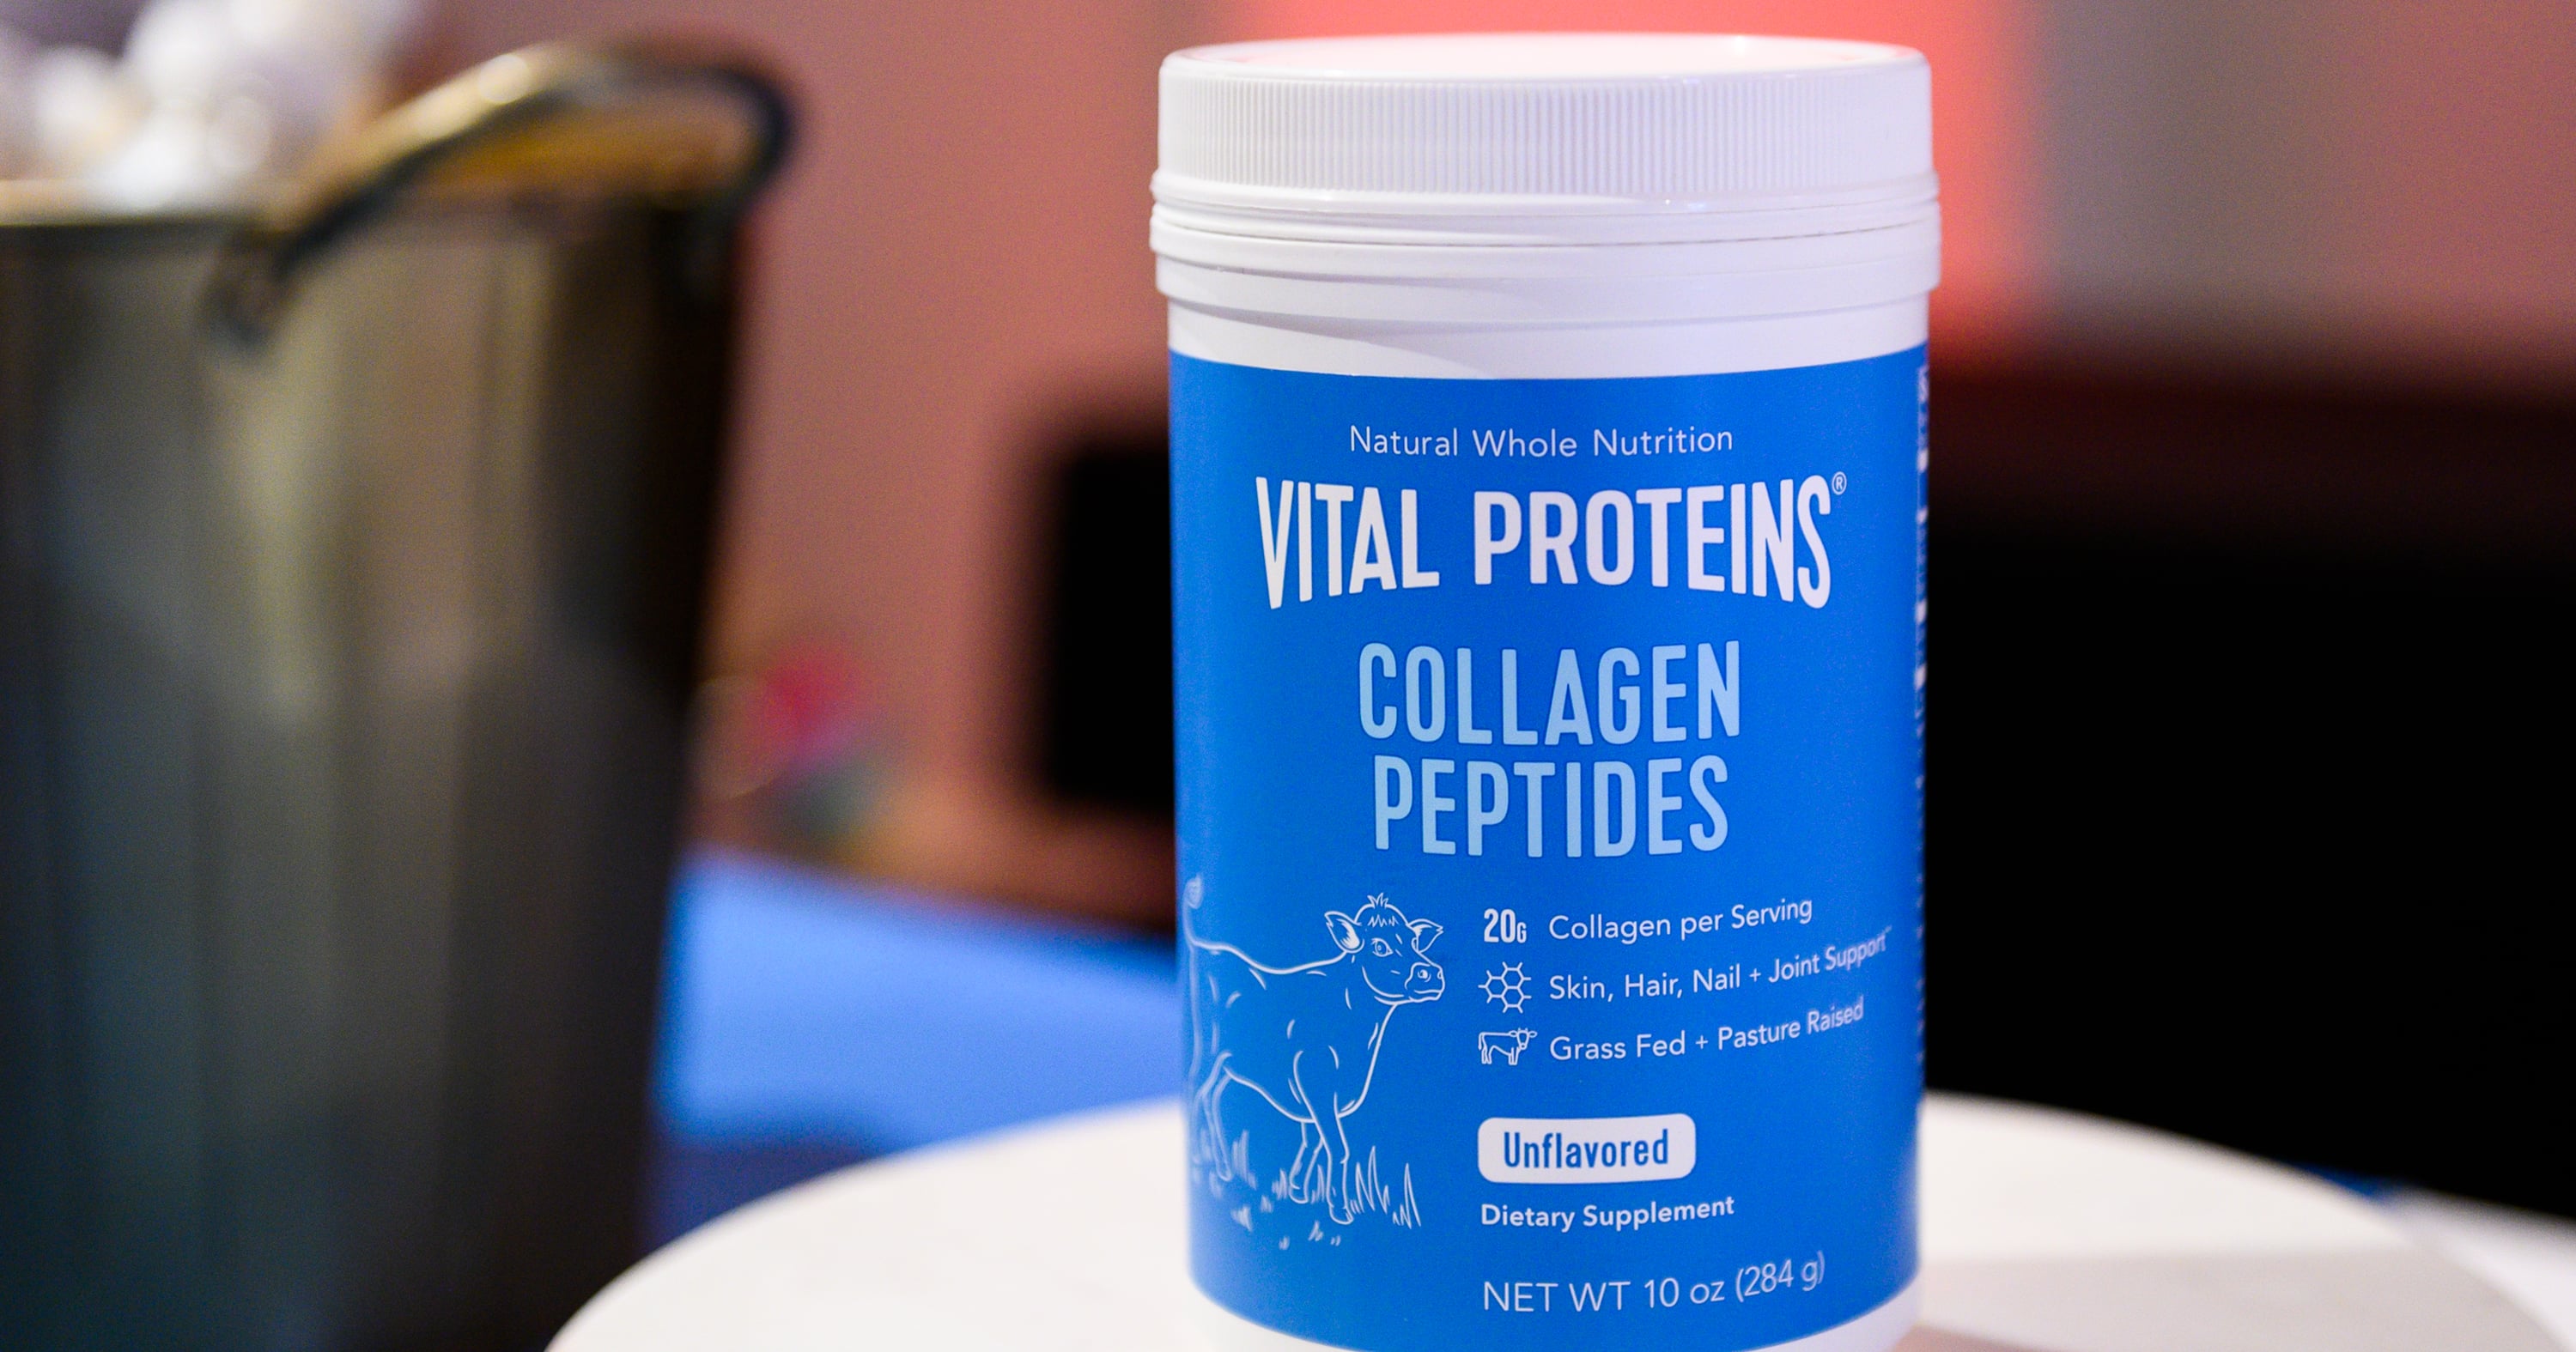 Jennifer Aniston and I Both Love This Collagen Powder — and It’s on Major Sale